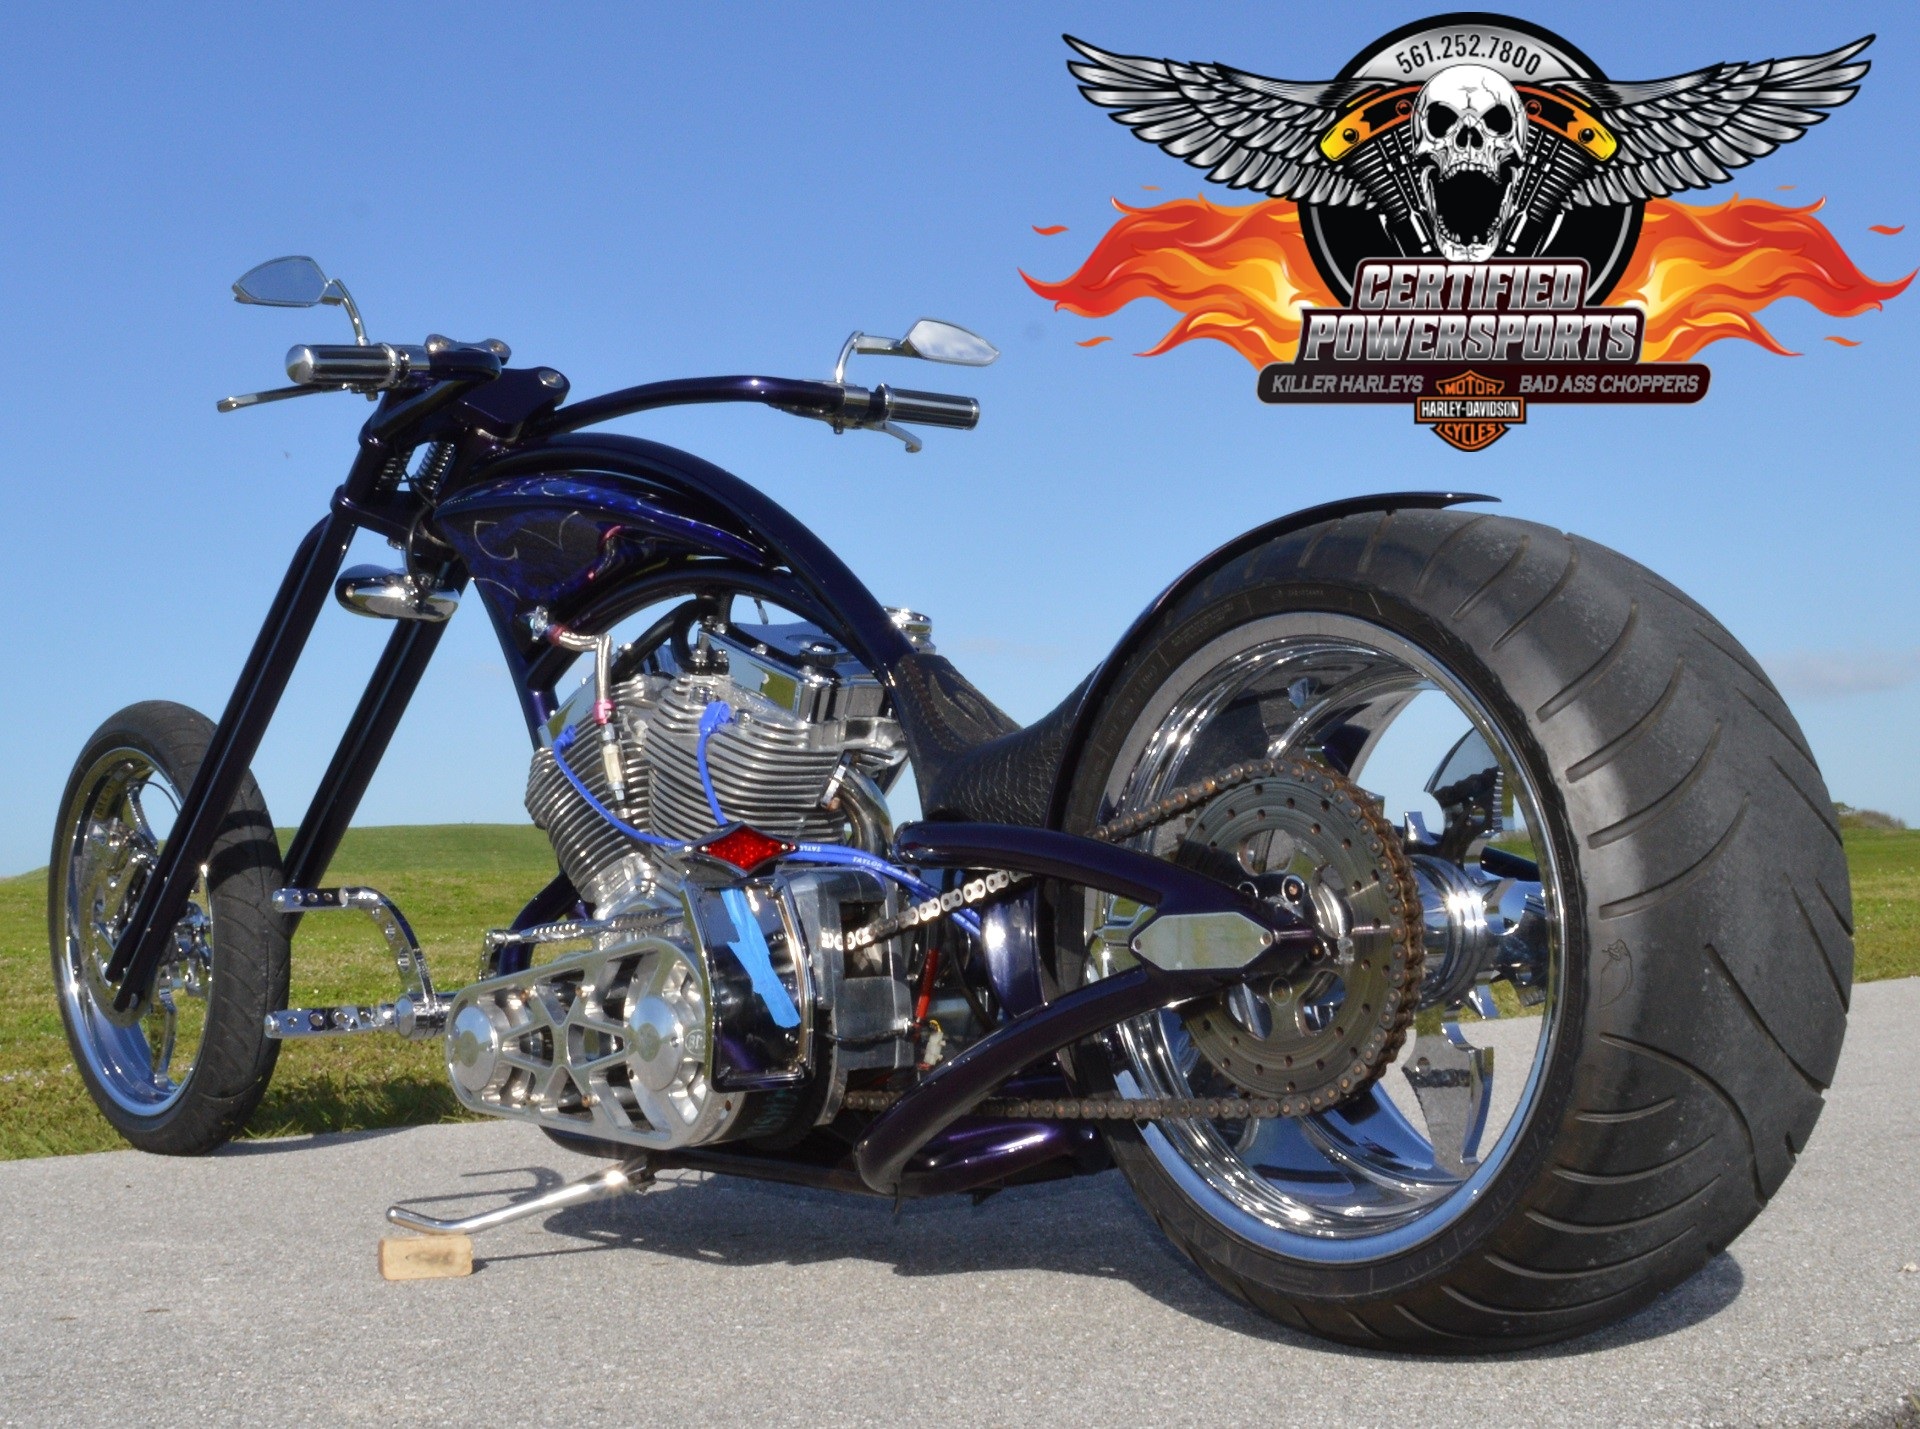 CrankyApe.com to Sell Motorcycle Featured on American Chopper to